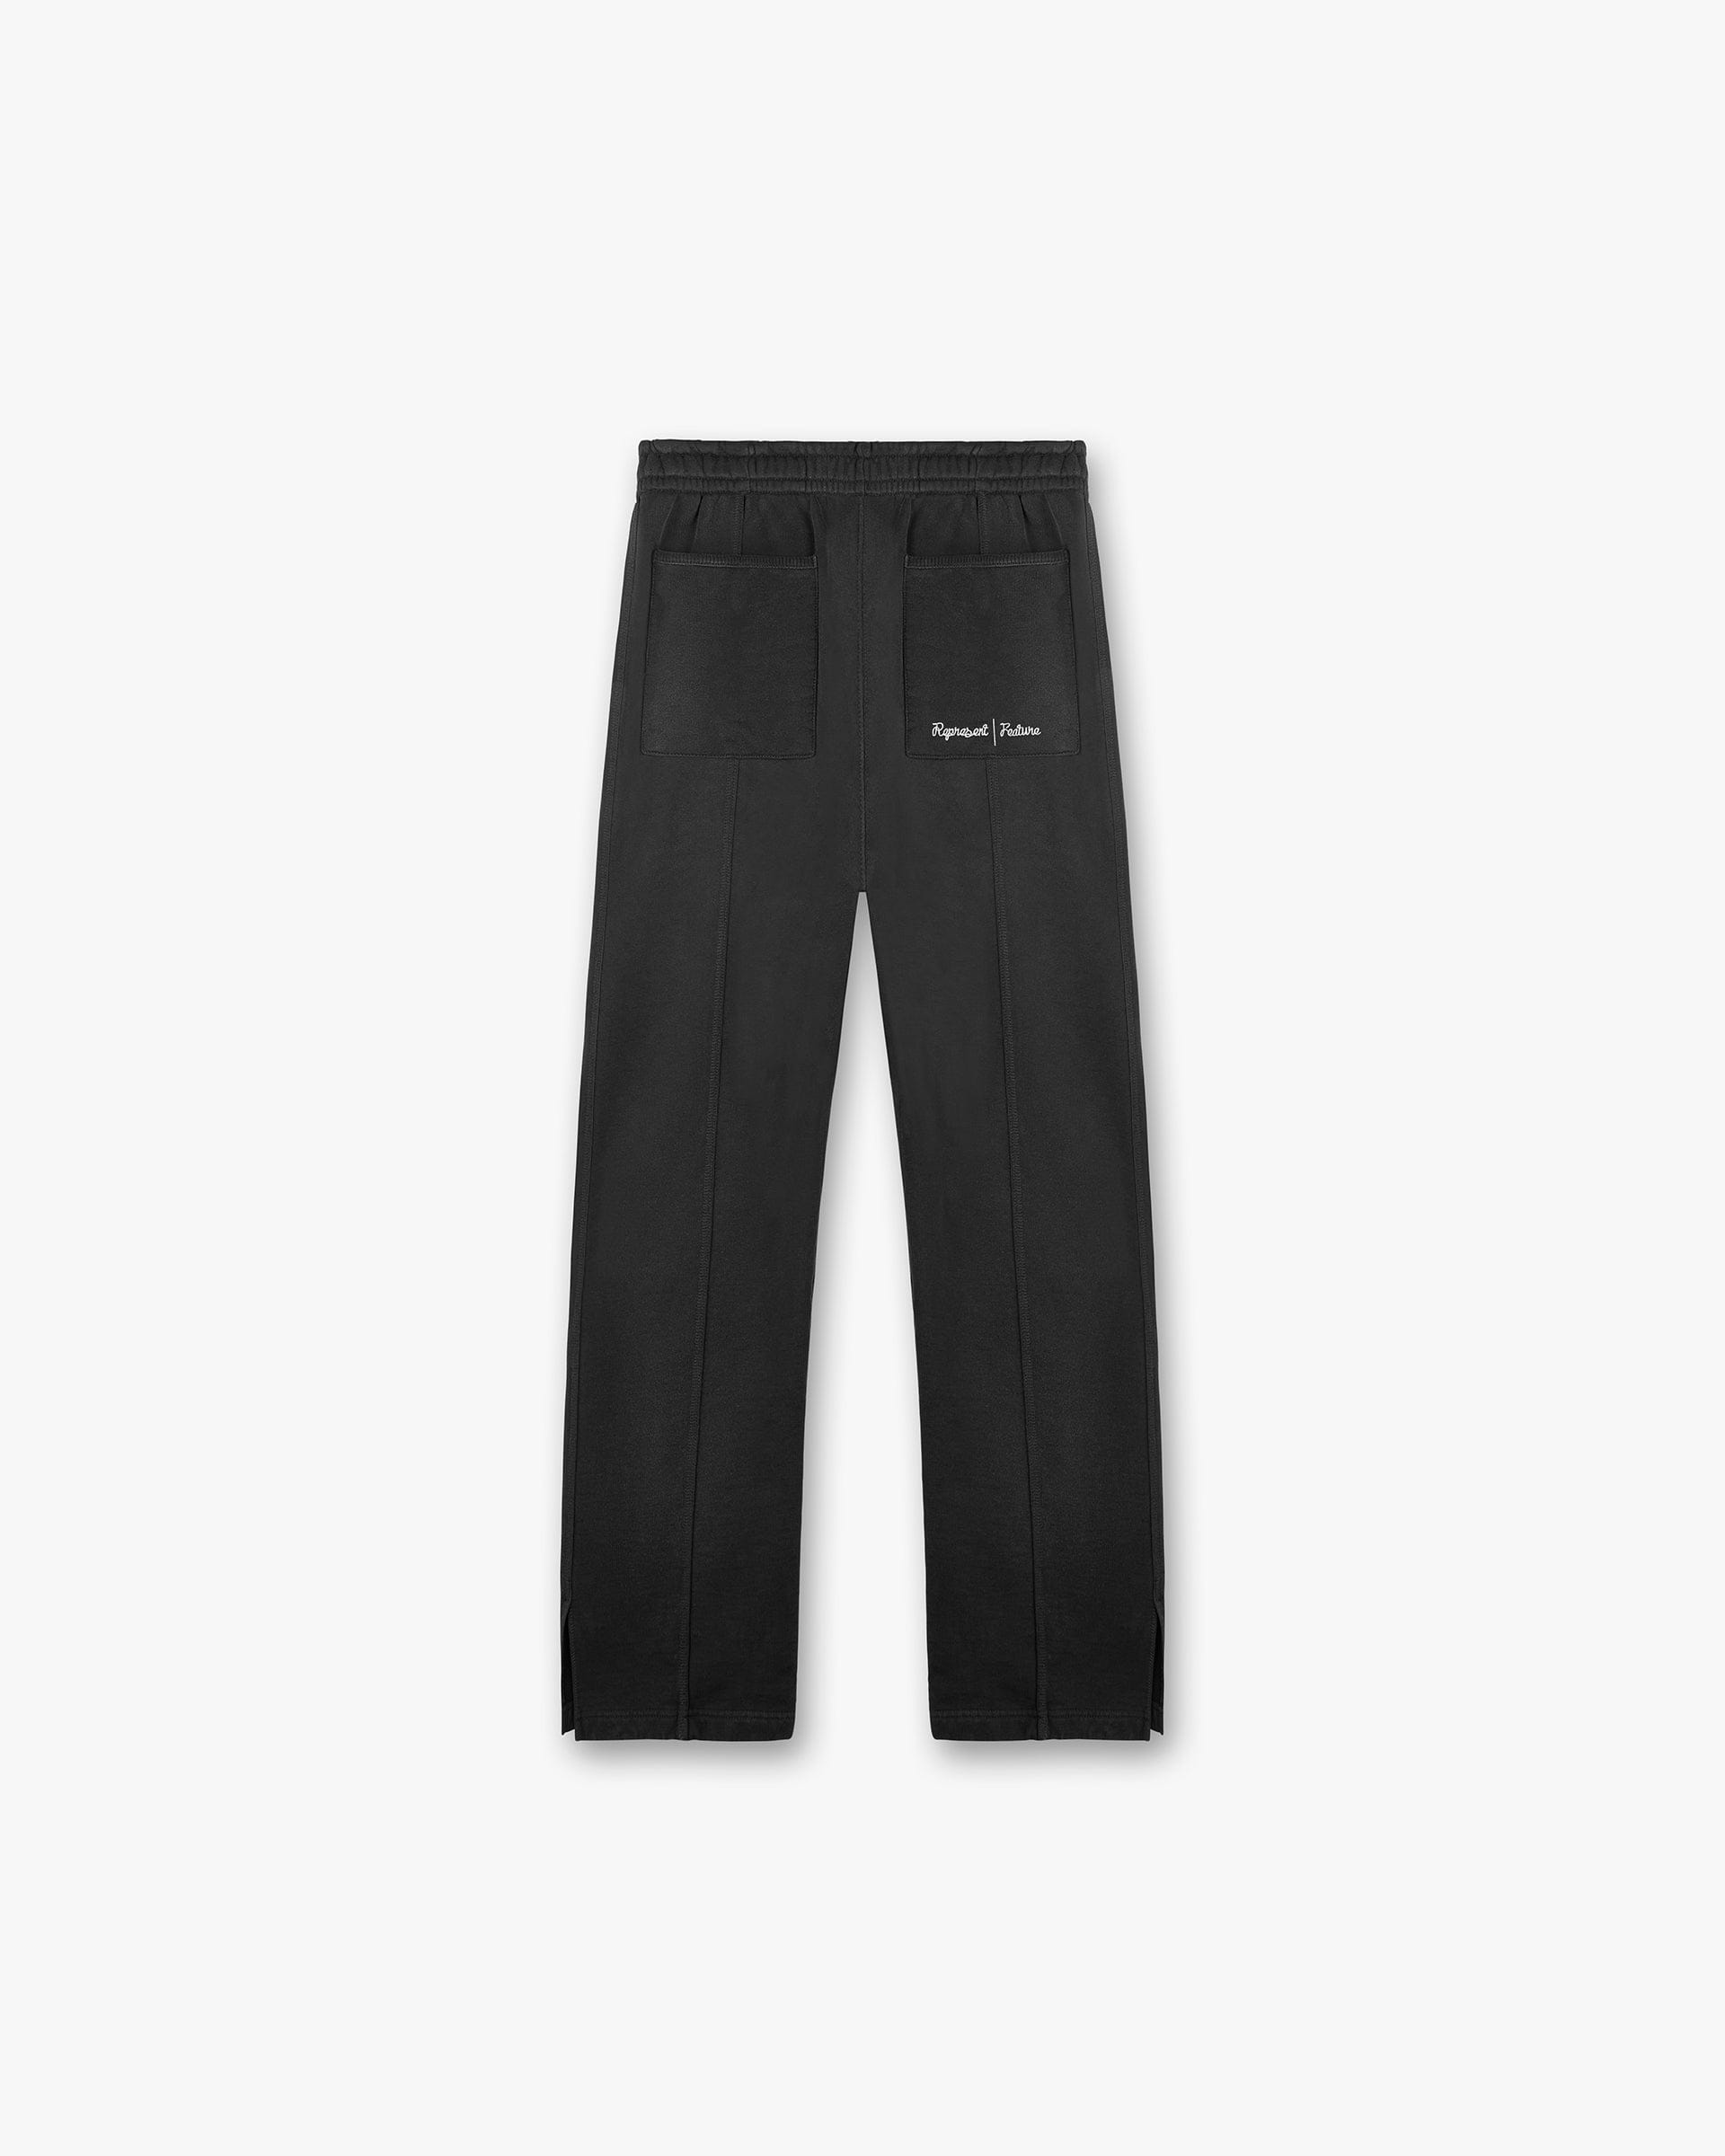 Represent X Feature Step Hem Sweatpants - Stained Black